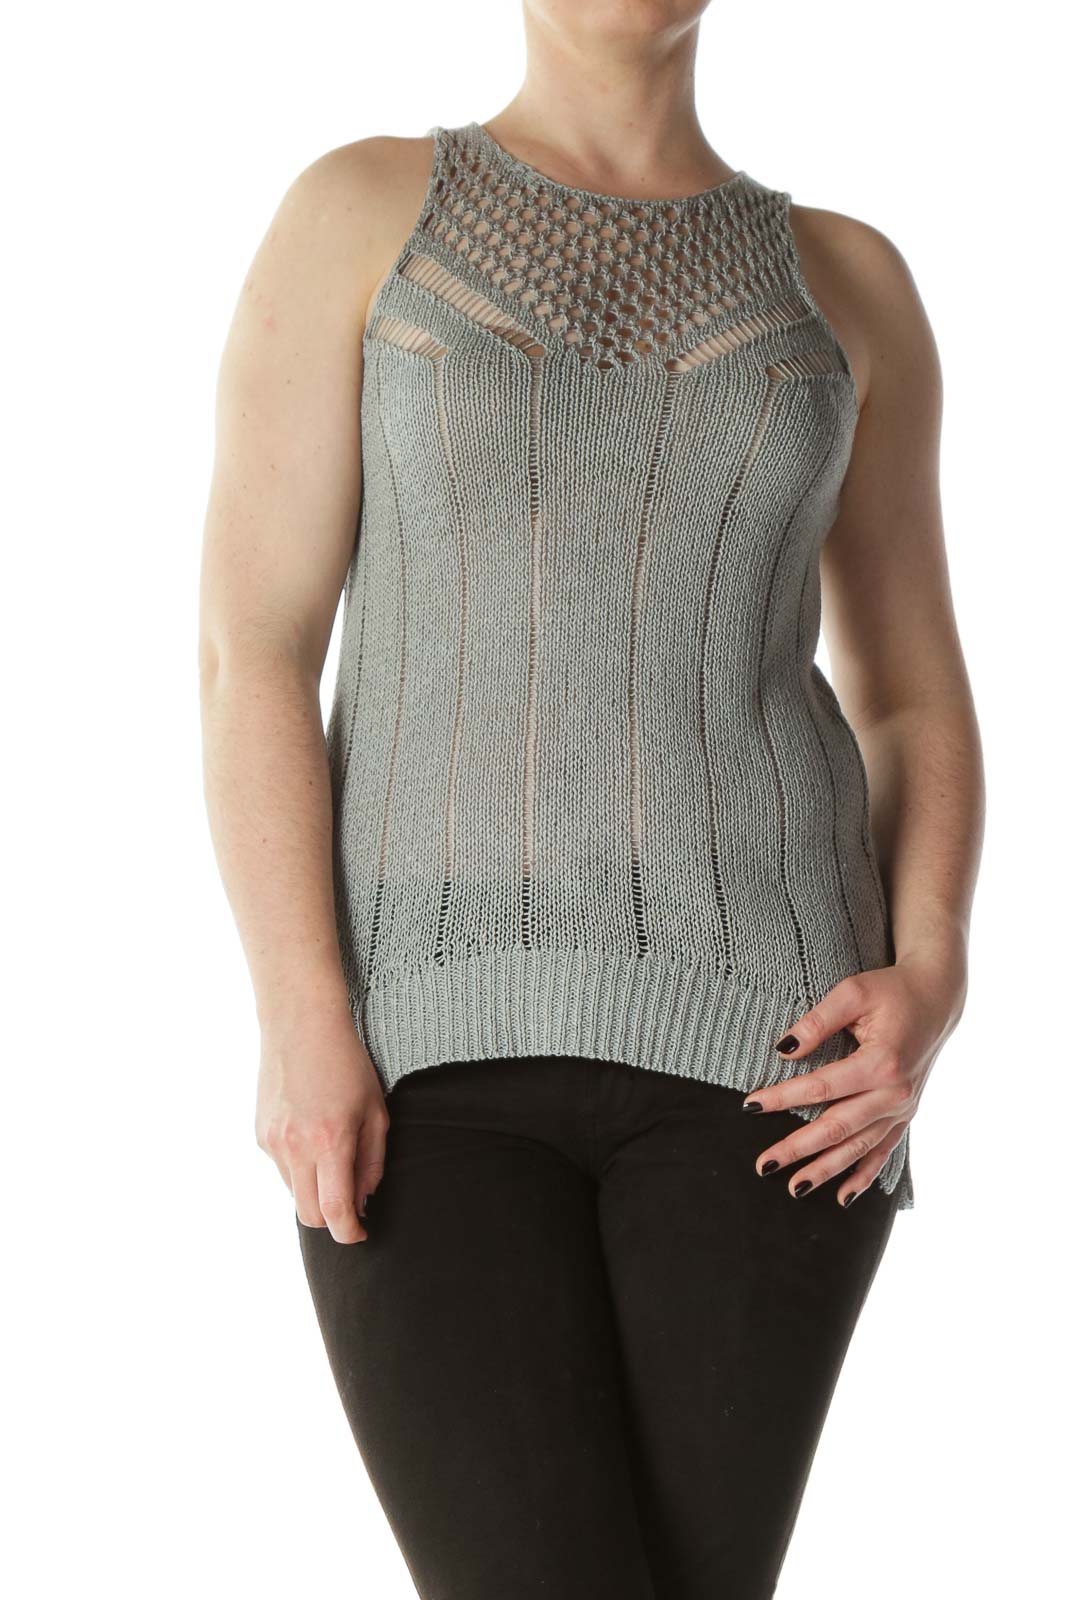 Gray Silver-Thread See-Through-Knit Dress Front